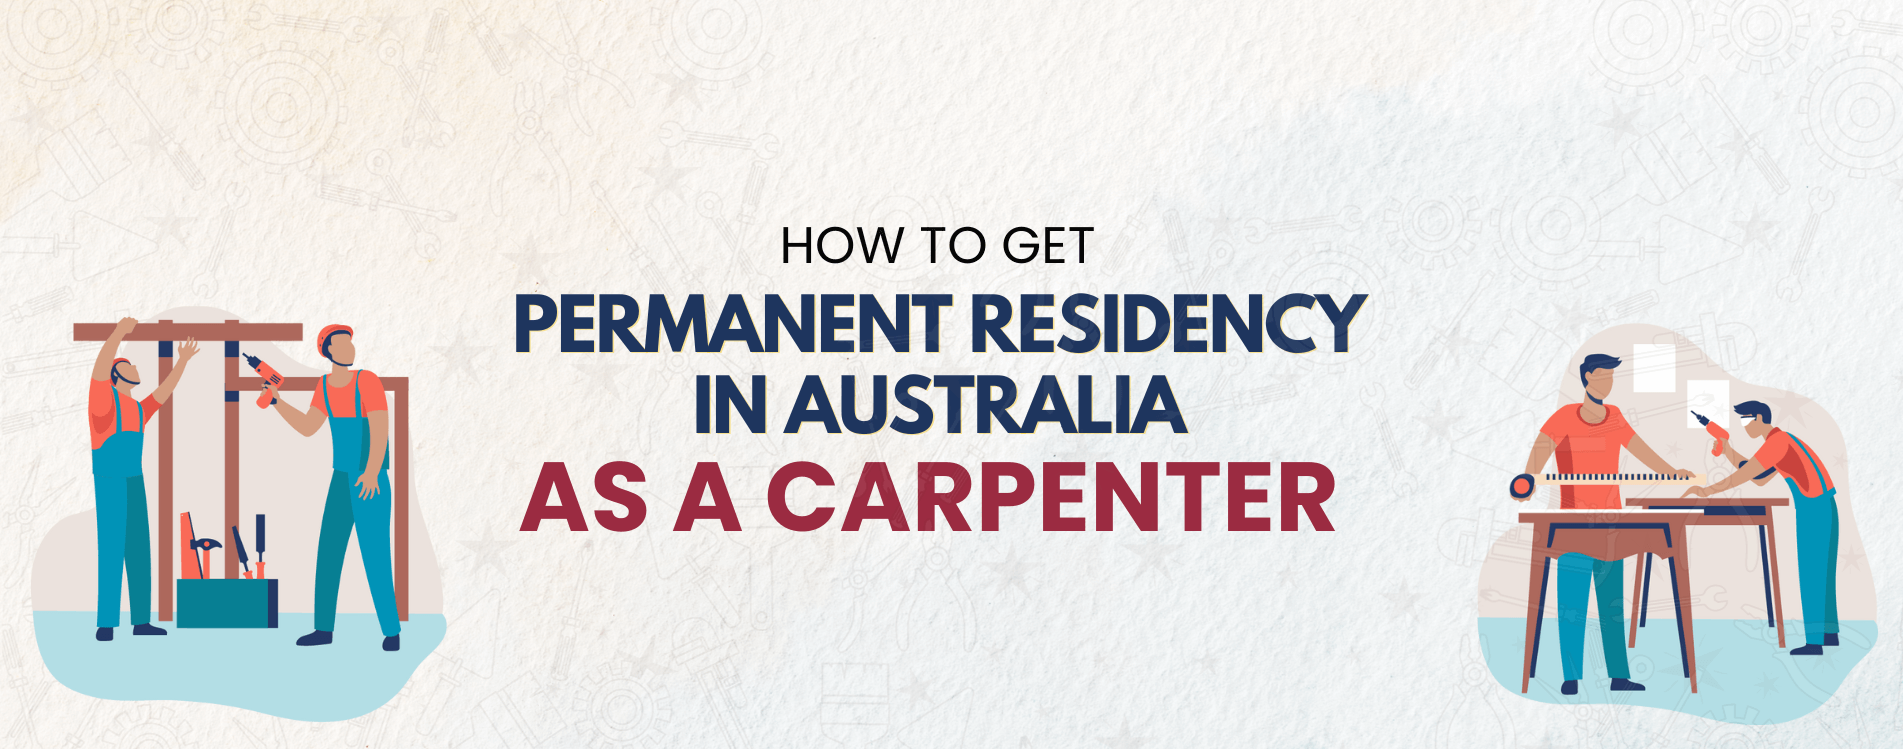 How to Get Permanent Residency in Australia as a Carpenter